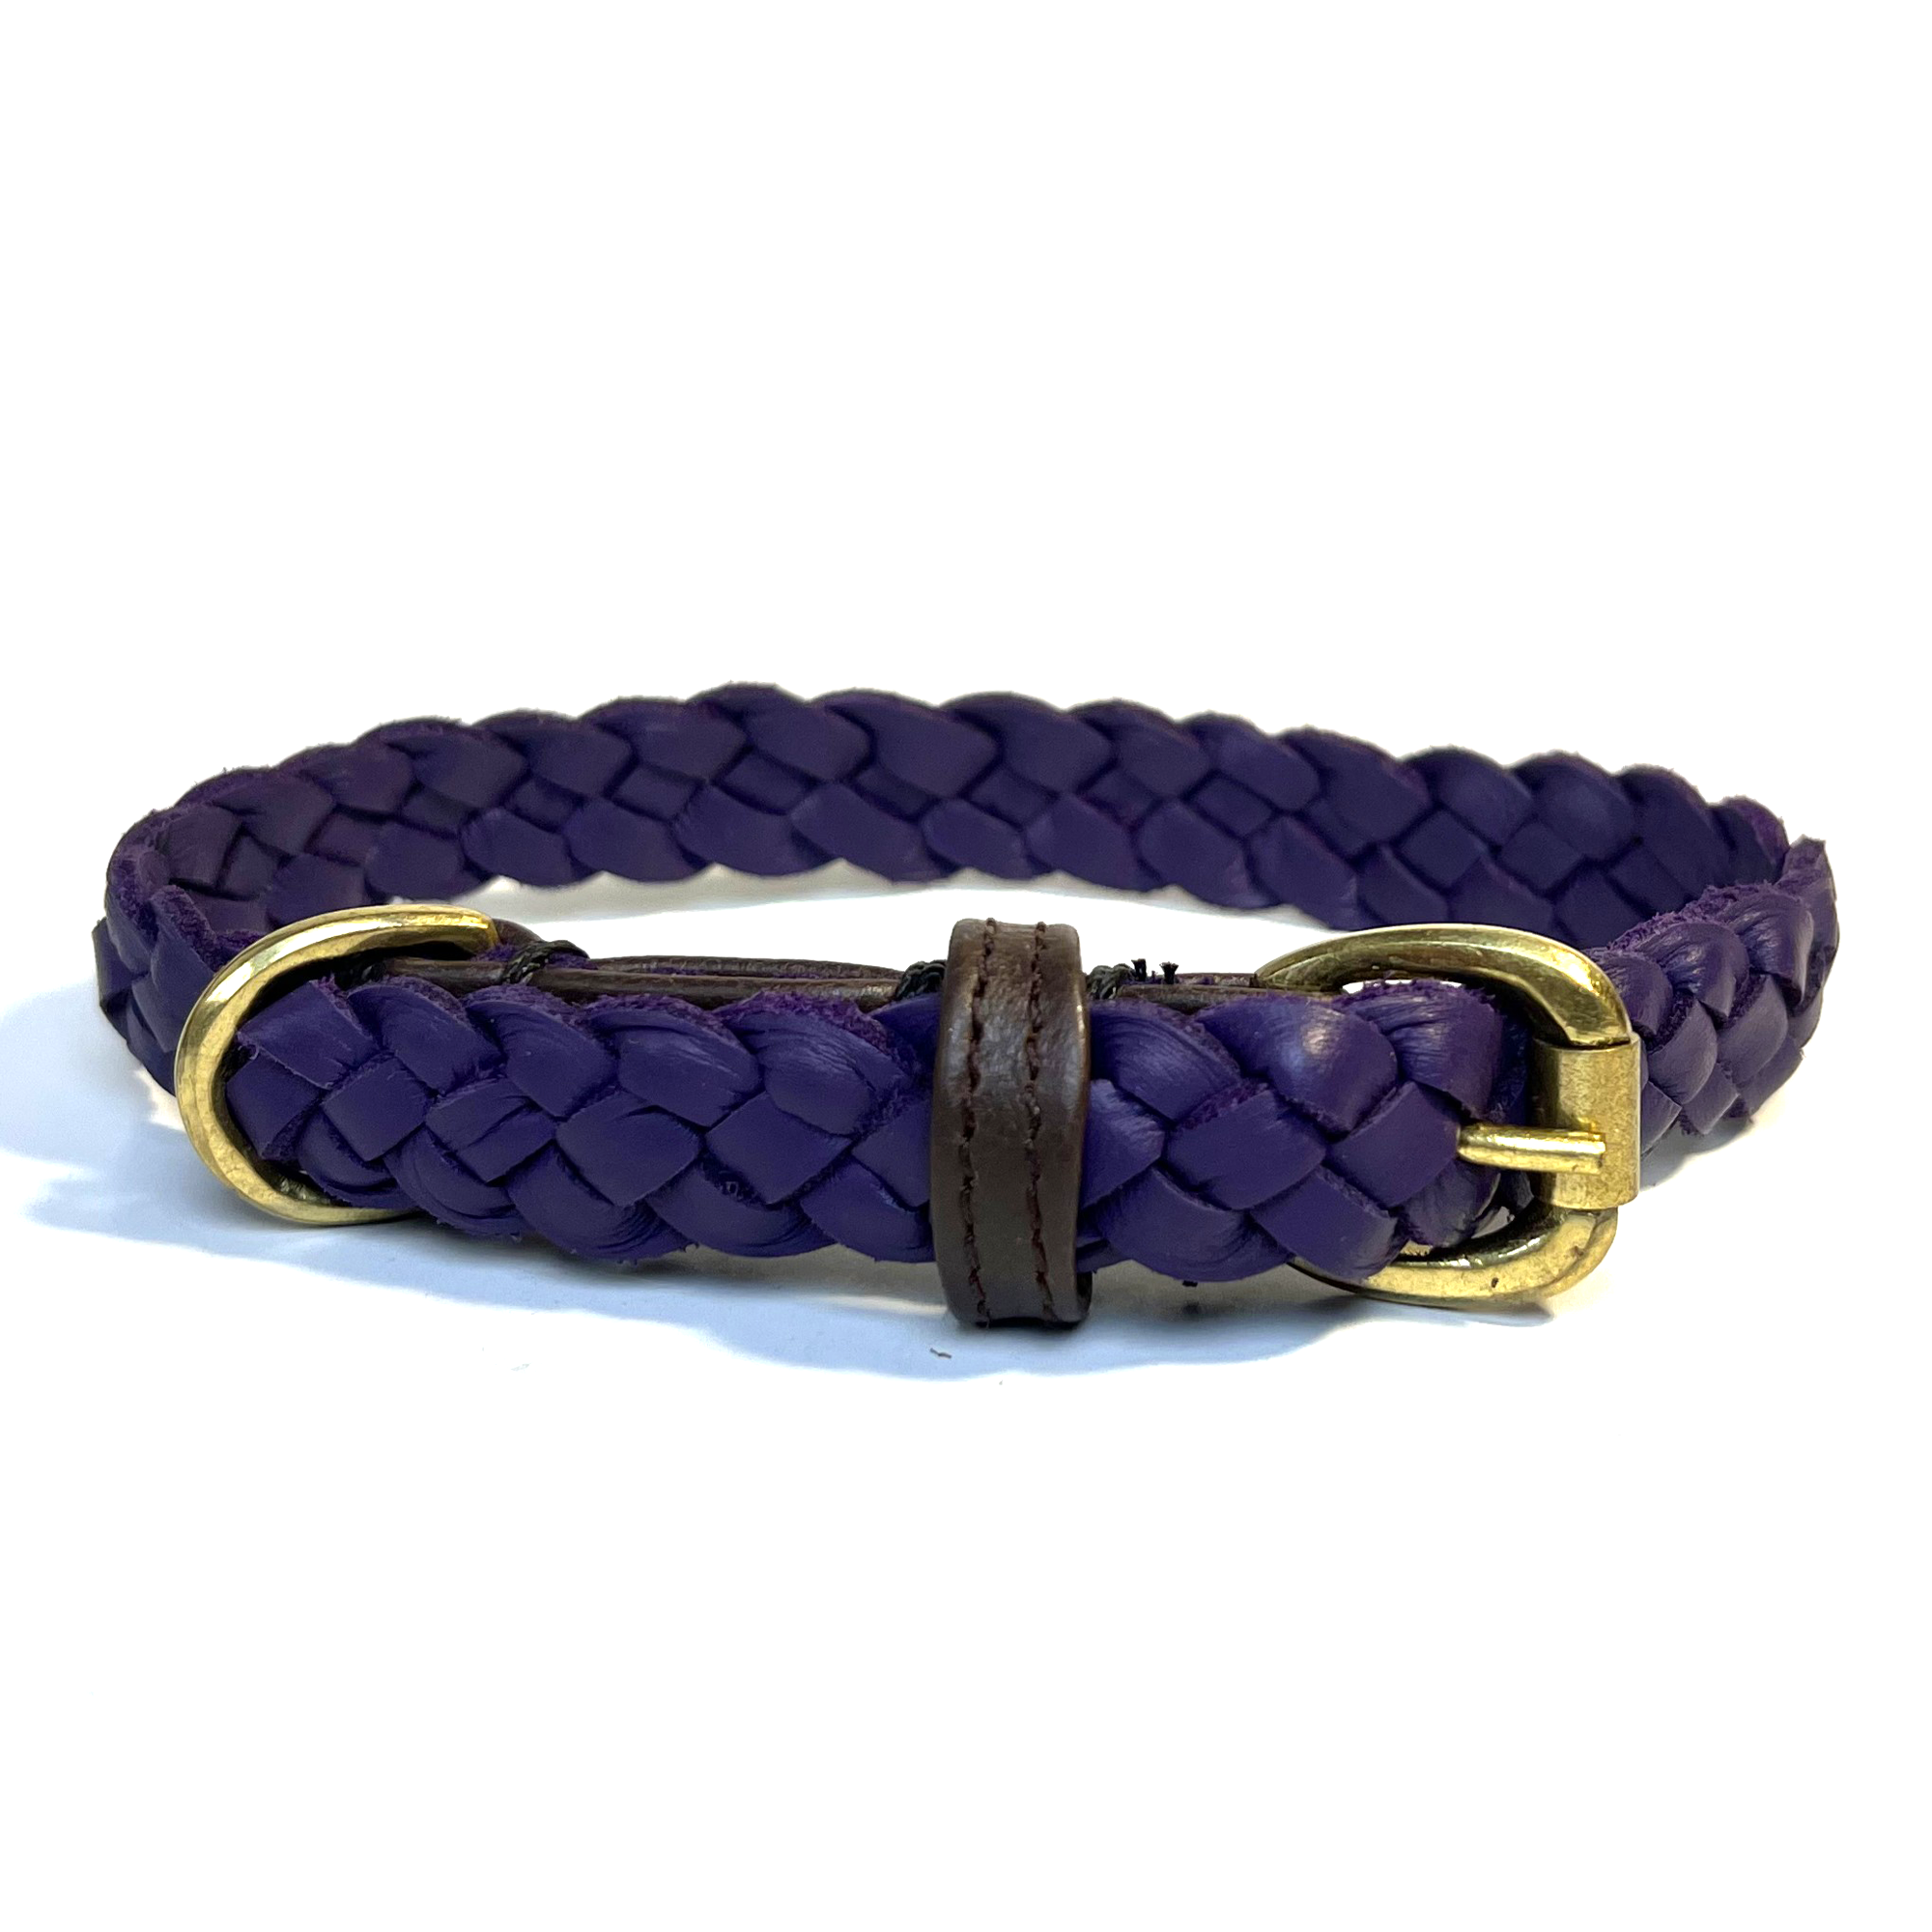 handmade flat 4 braid leather purple dog collar with natural trim.  Soft, Strong, sustainable and compostable Buffalo Leather.  Aged brass buckle. Only for small dogs and puppies under 10kg